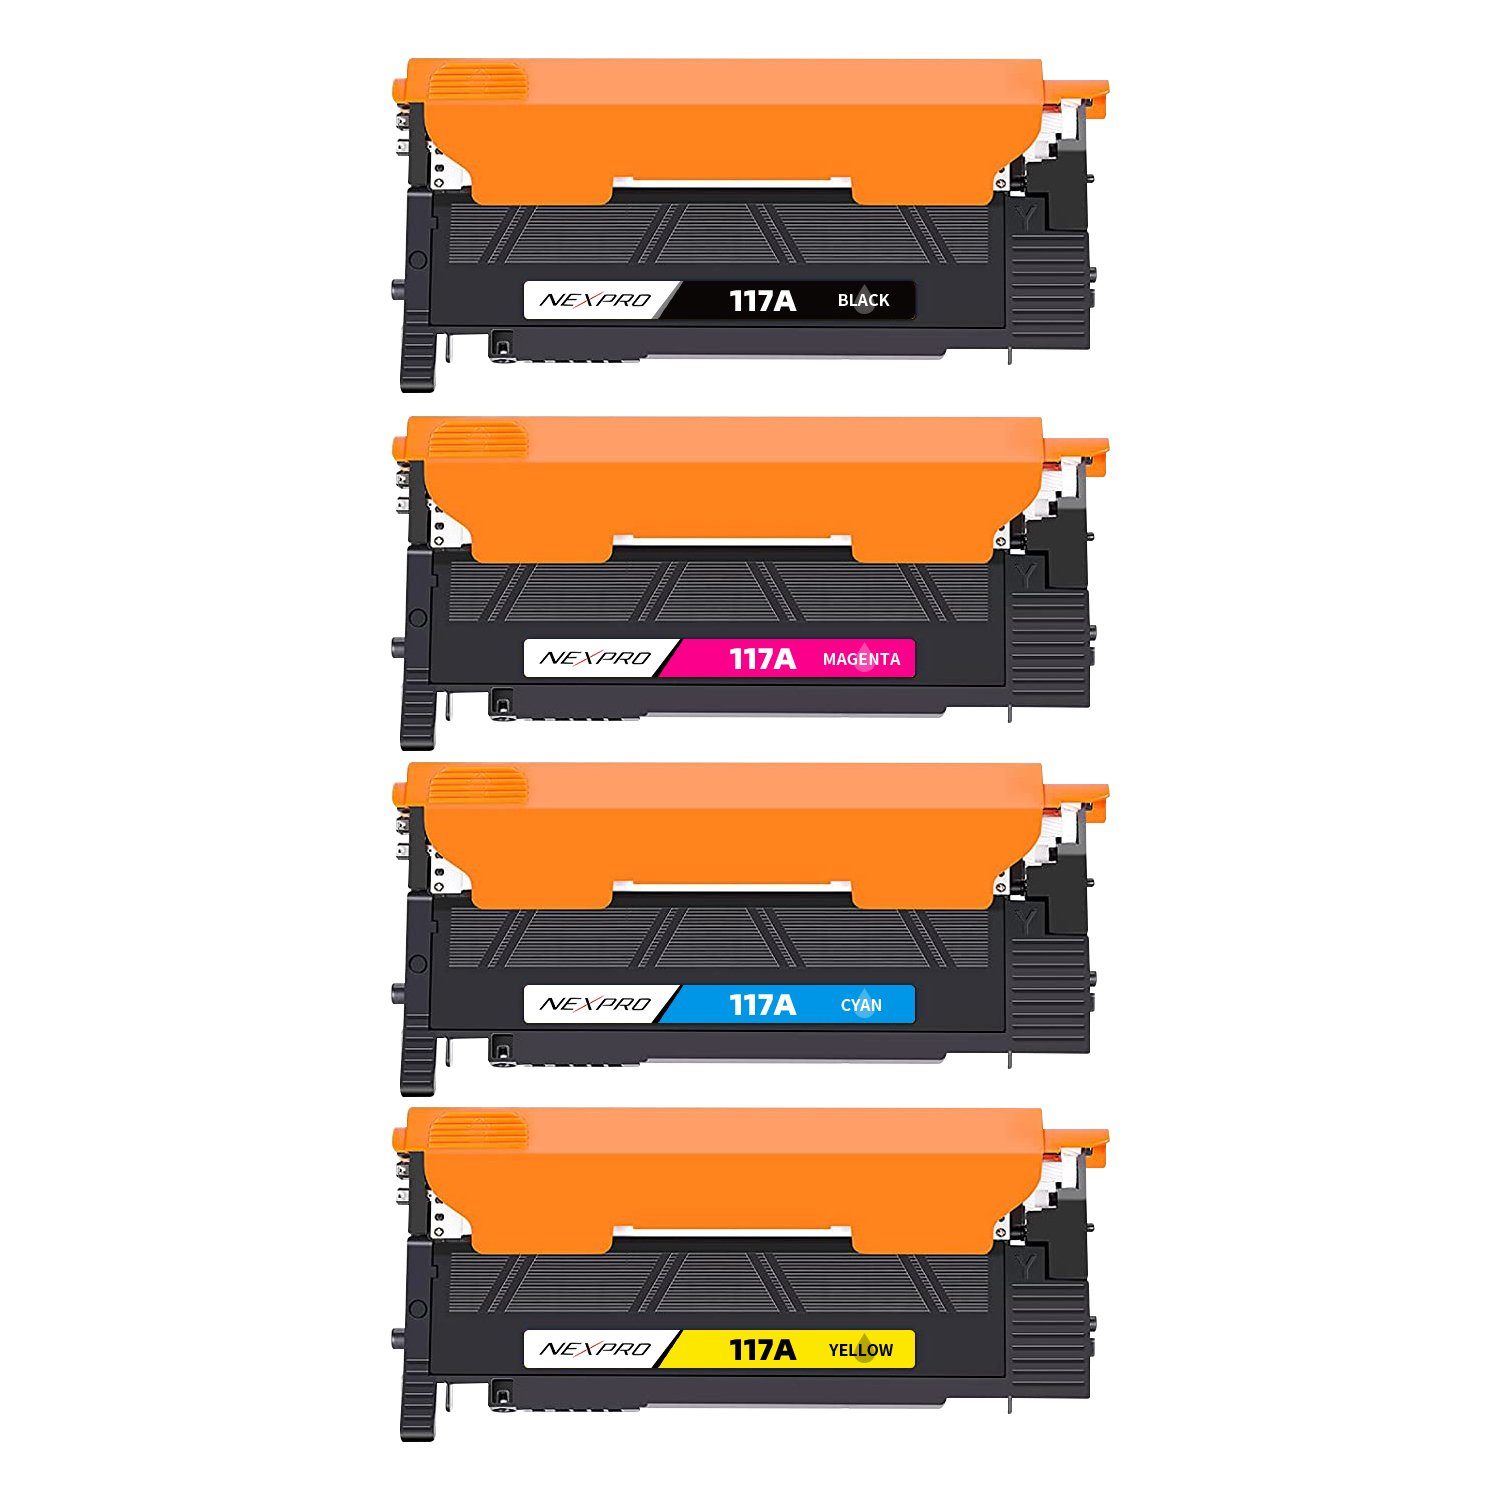 NEXPRO Tonerpatrone 150a 178nwg 117 MFP 117A HP 4er, W2073A W2070A Multipack), Toner für A W2072A 150nw 179fnw für Laser HP (Packung, Color 178nw W2071A 179fwg 150nw Toner